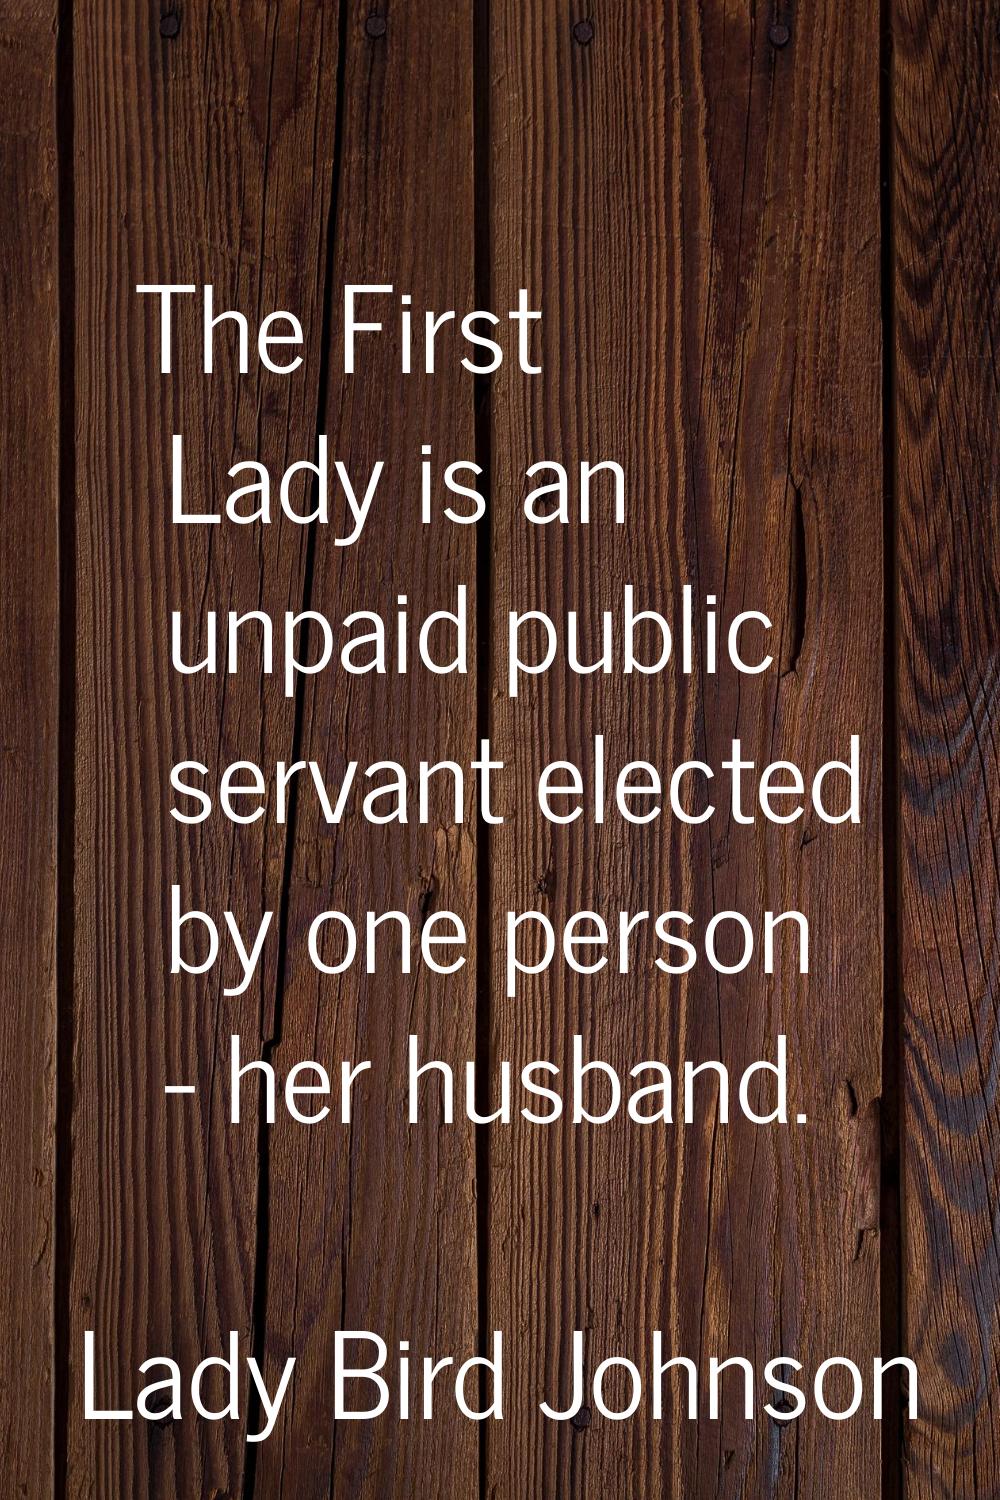 The First Lady is an unpaid public servant elected by one person - her husband.